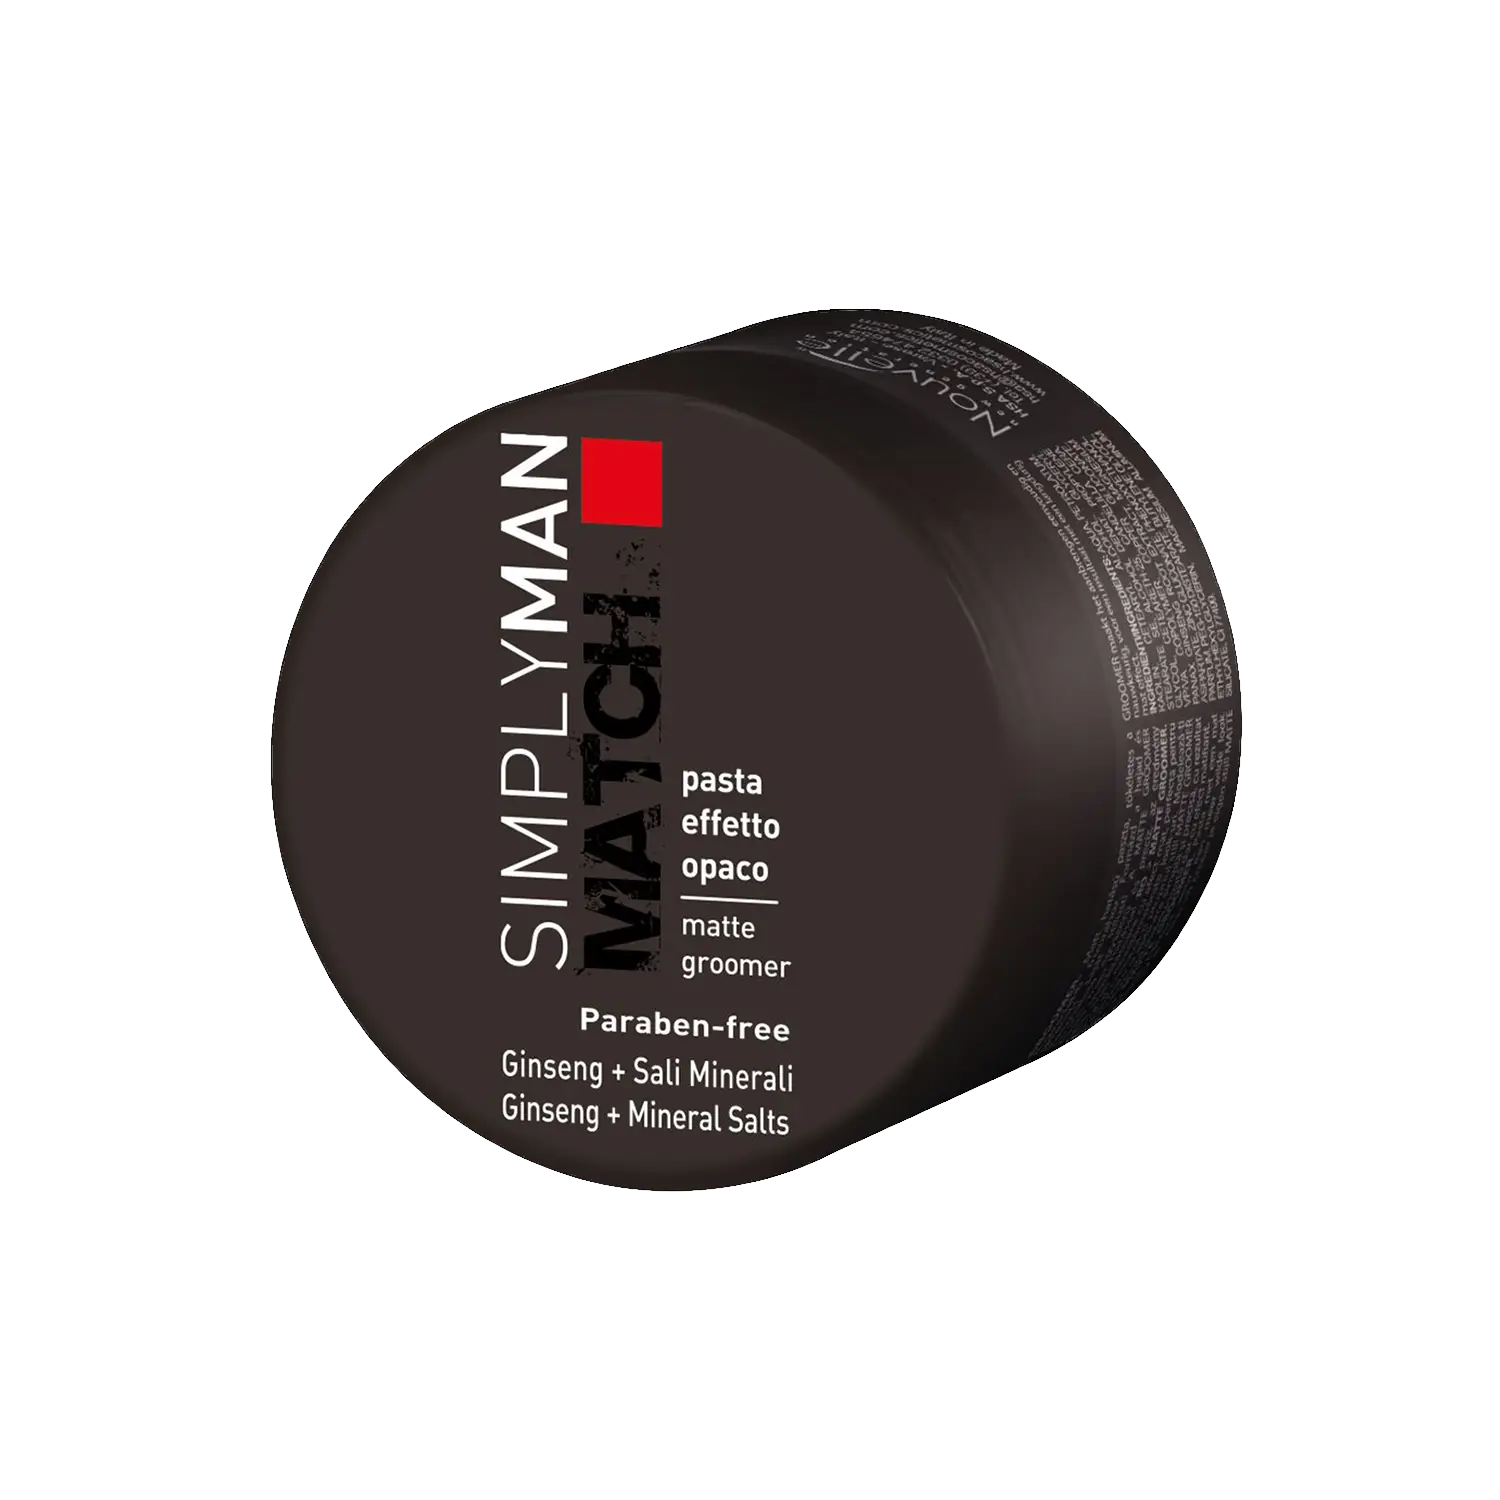 Waxiets-SIMPLY-MAN-MATCH-MATTE-GROOMER-100ML-Gallery-Featured_ copy